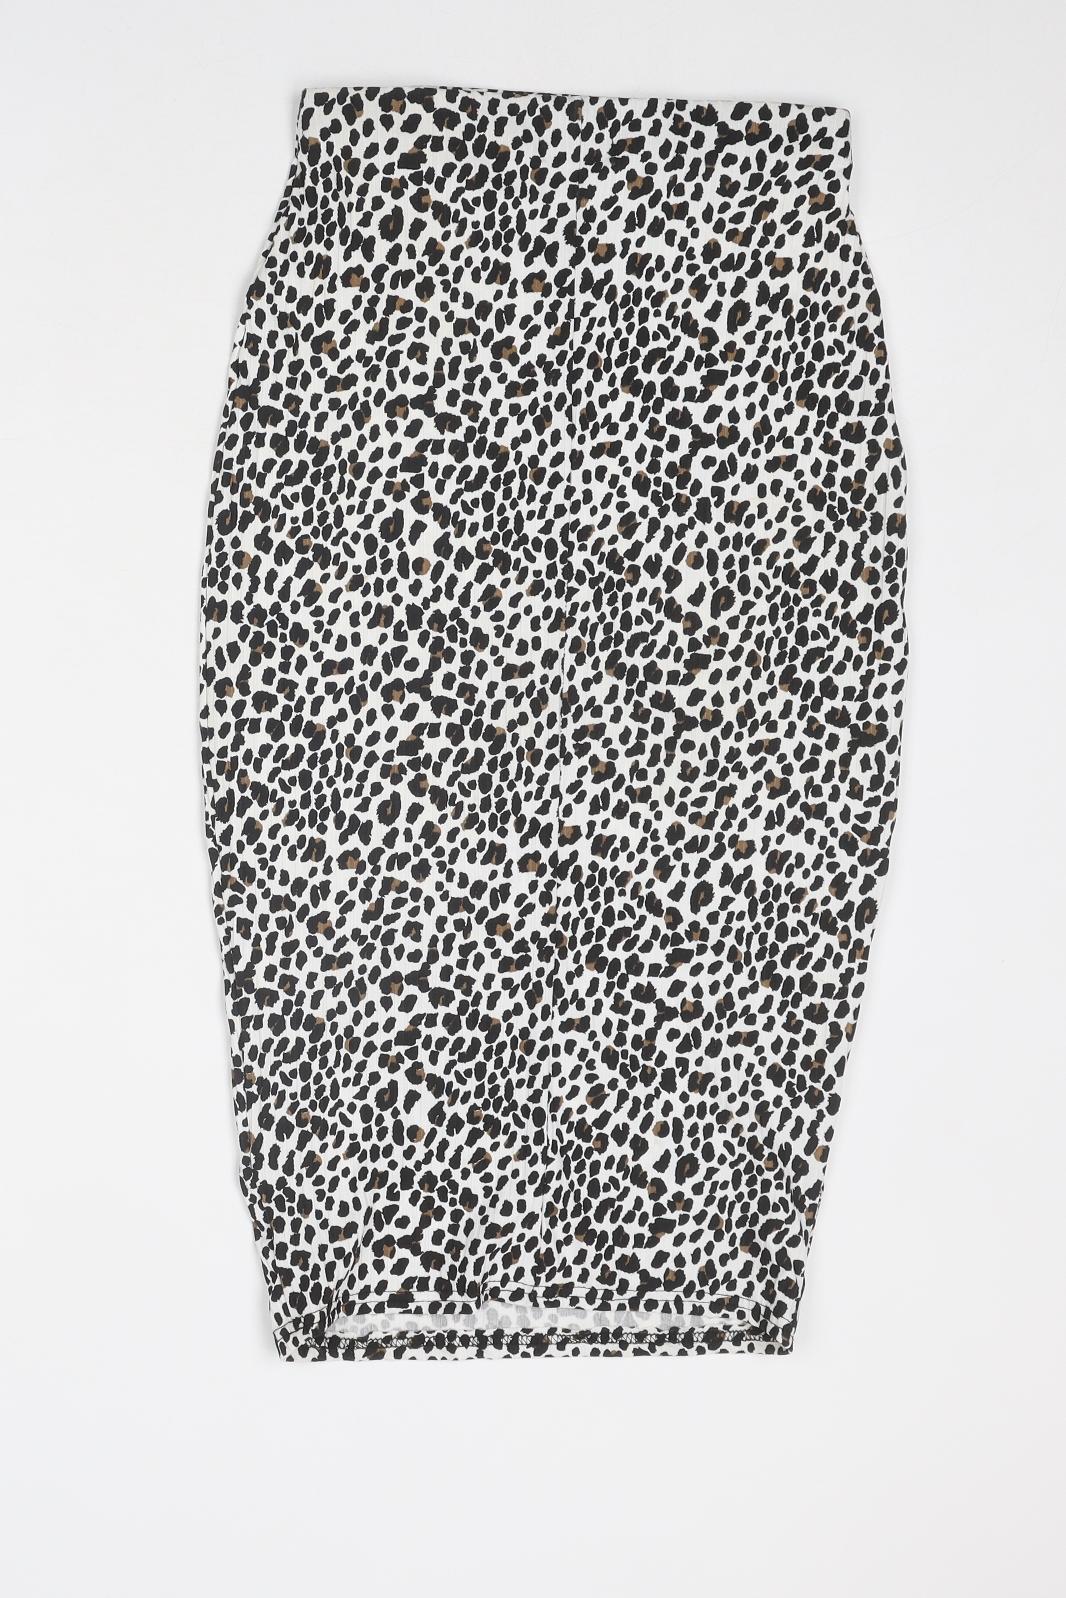 PRETTYLITTLETHING Womens Multicoloured Animal Print Polyester Straight & Pencil Skirt Size 8 - Leopard Pattern